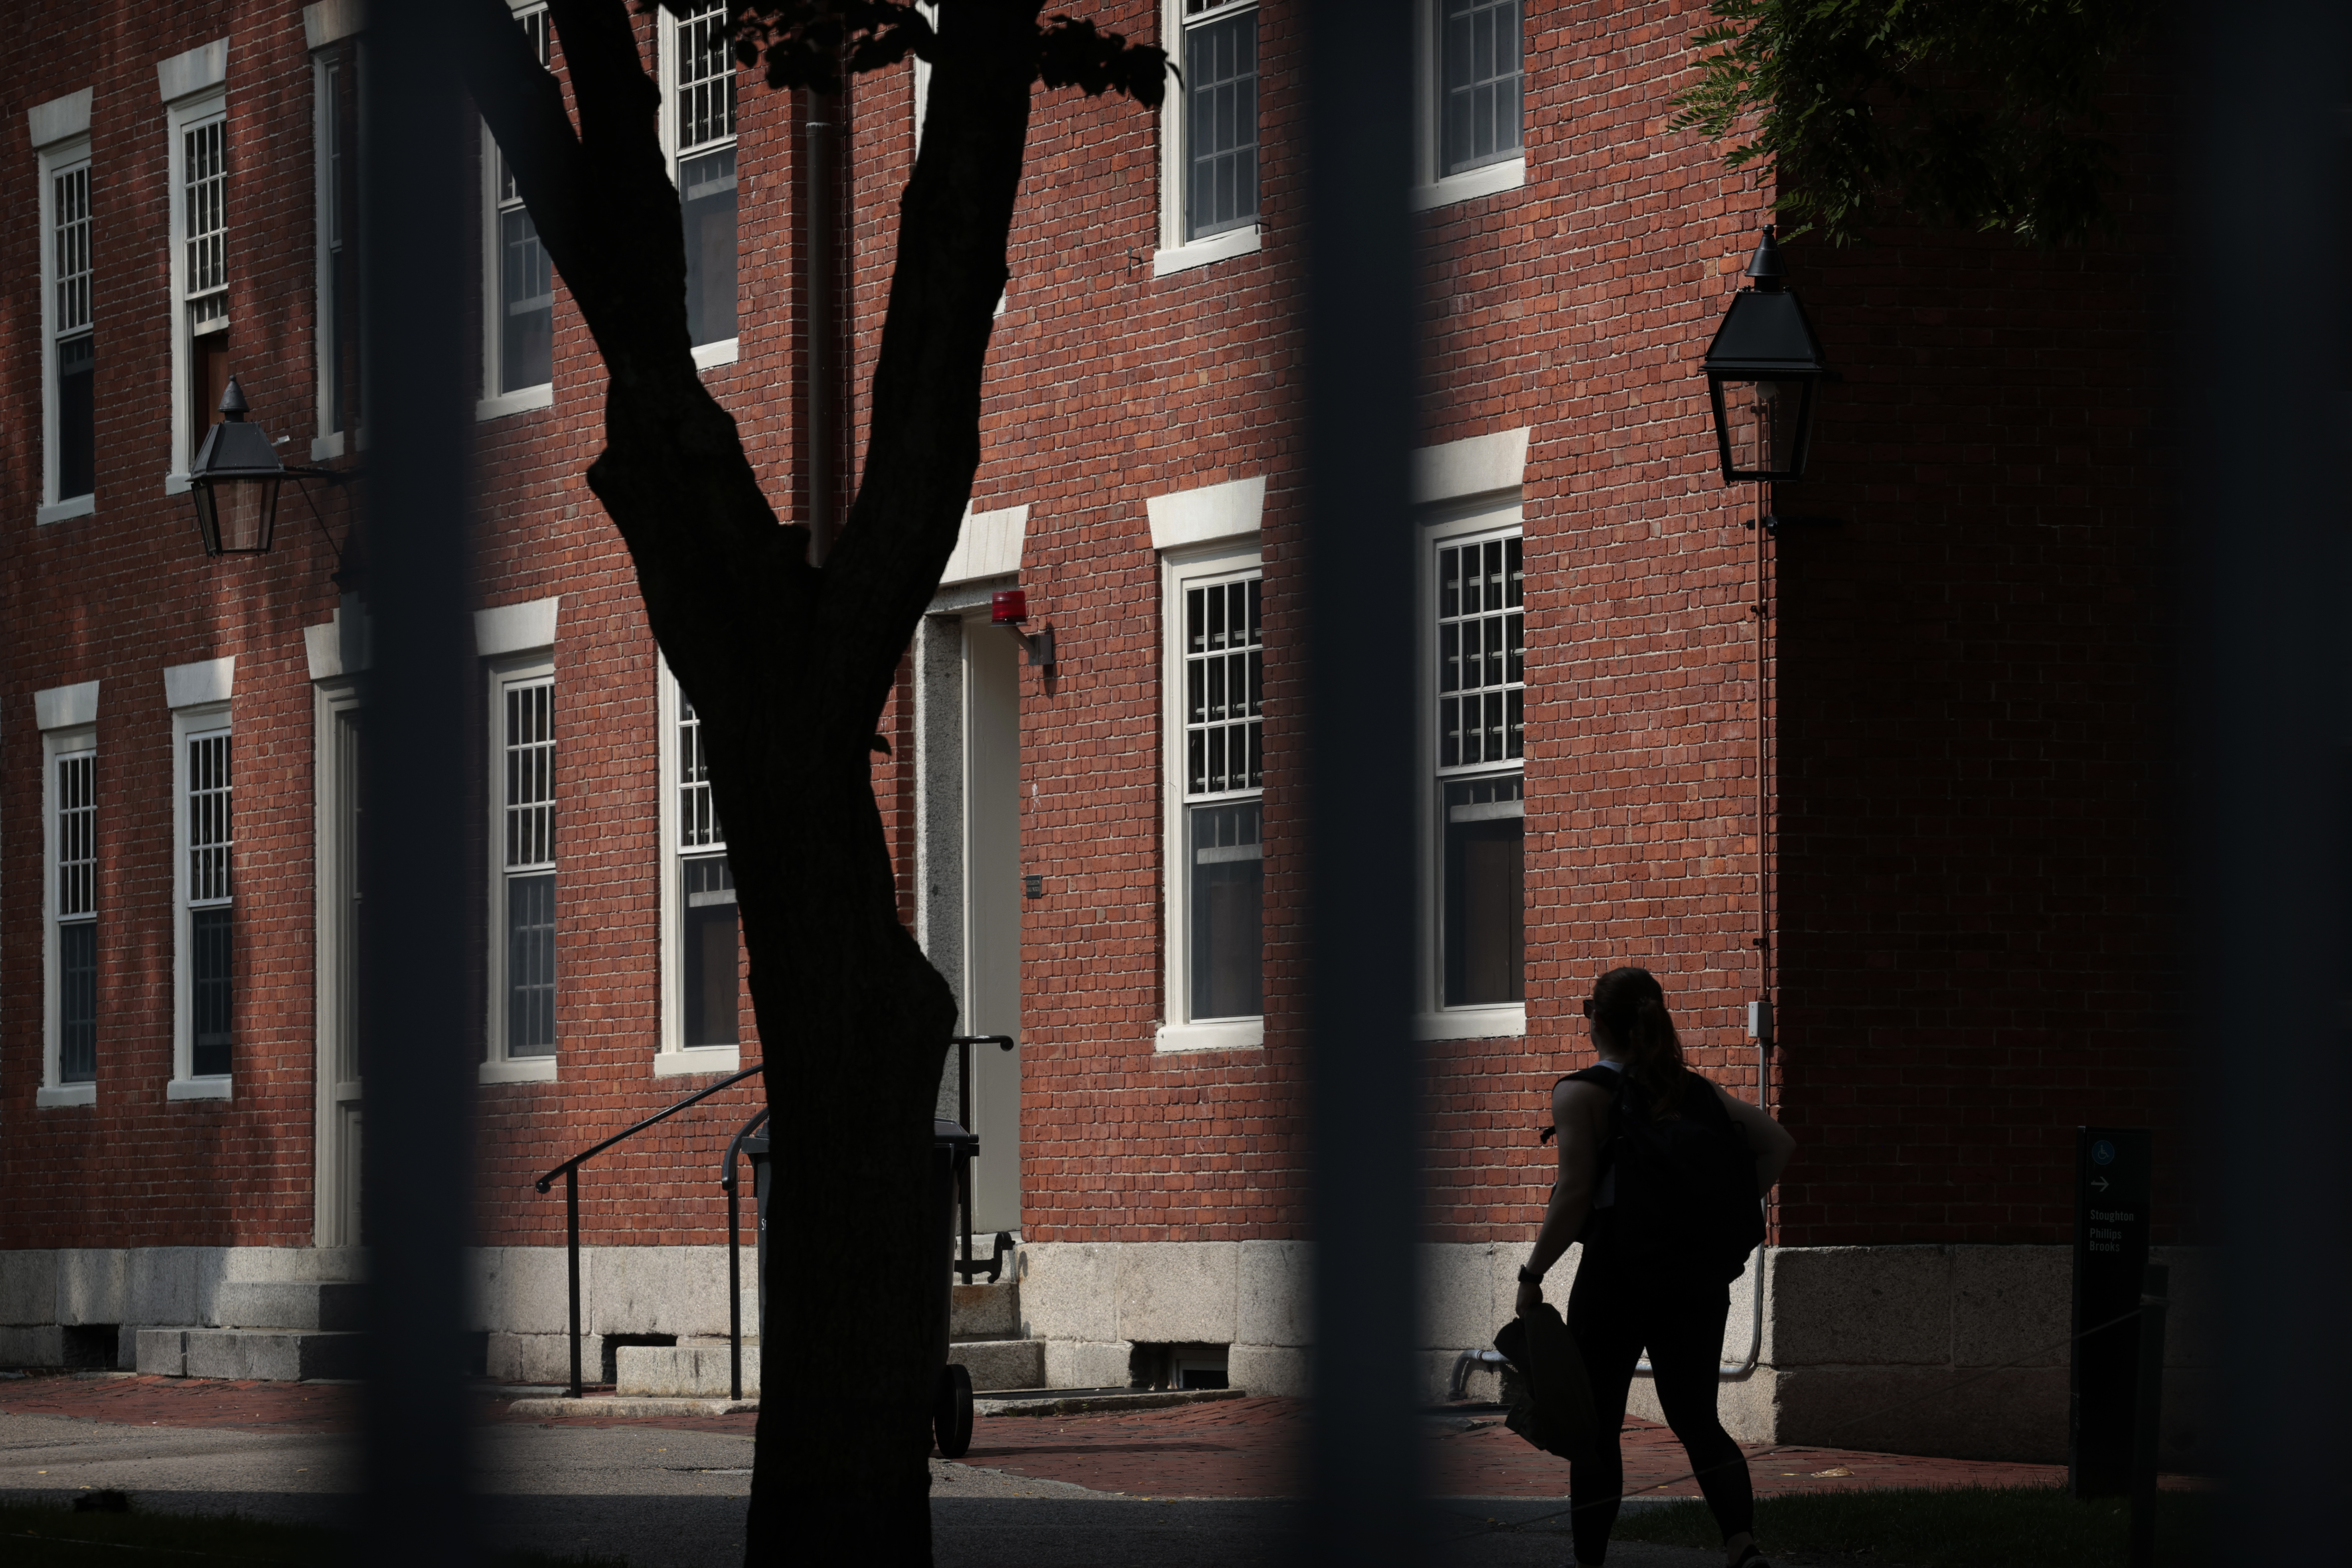 Amid concerns about antisemitism on campus, Department of Education opens  investigation into Harvard - The Boston Globe